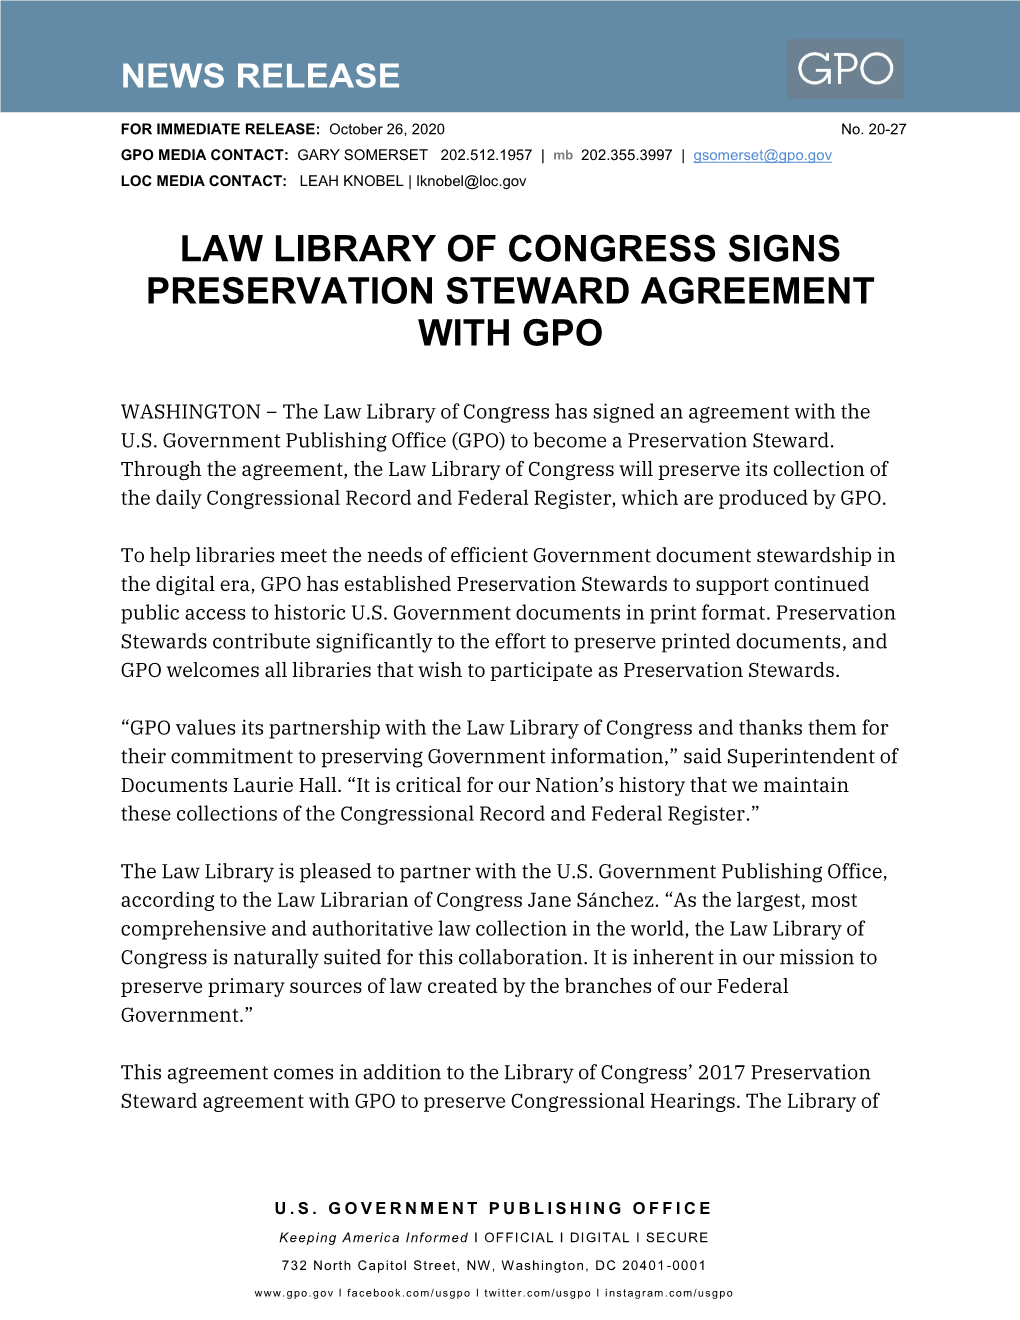 Law Library of Congress Signs Preservation Steward Agreement with Gpo